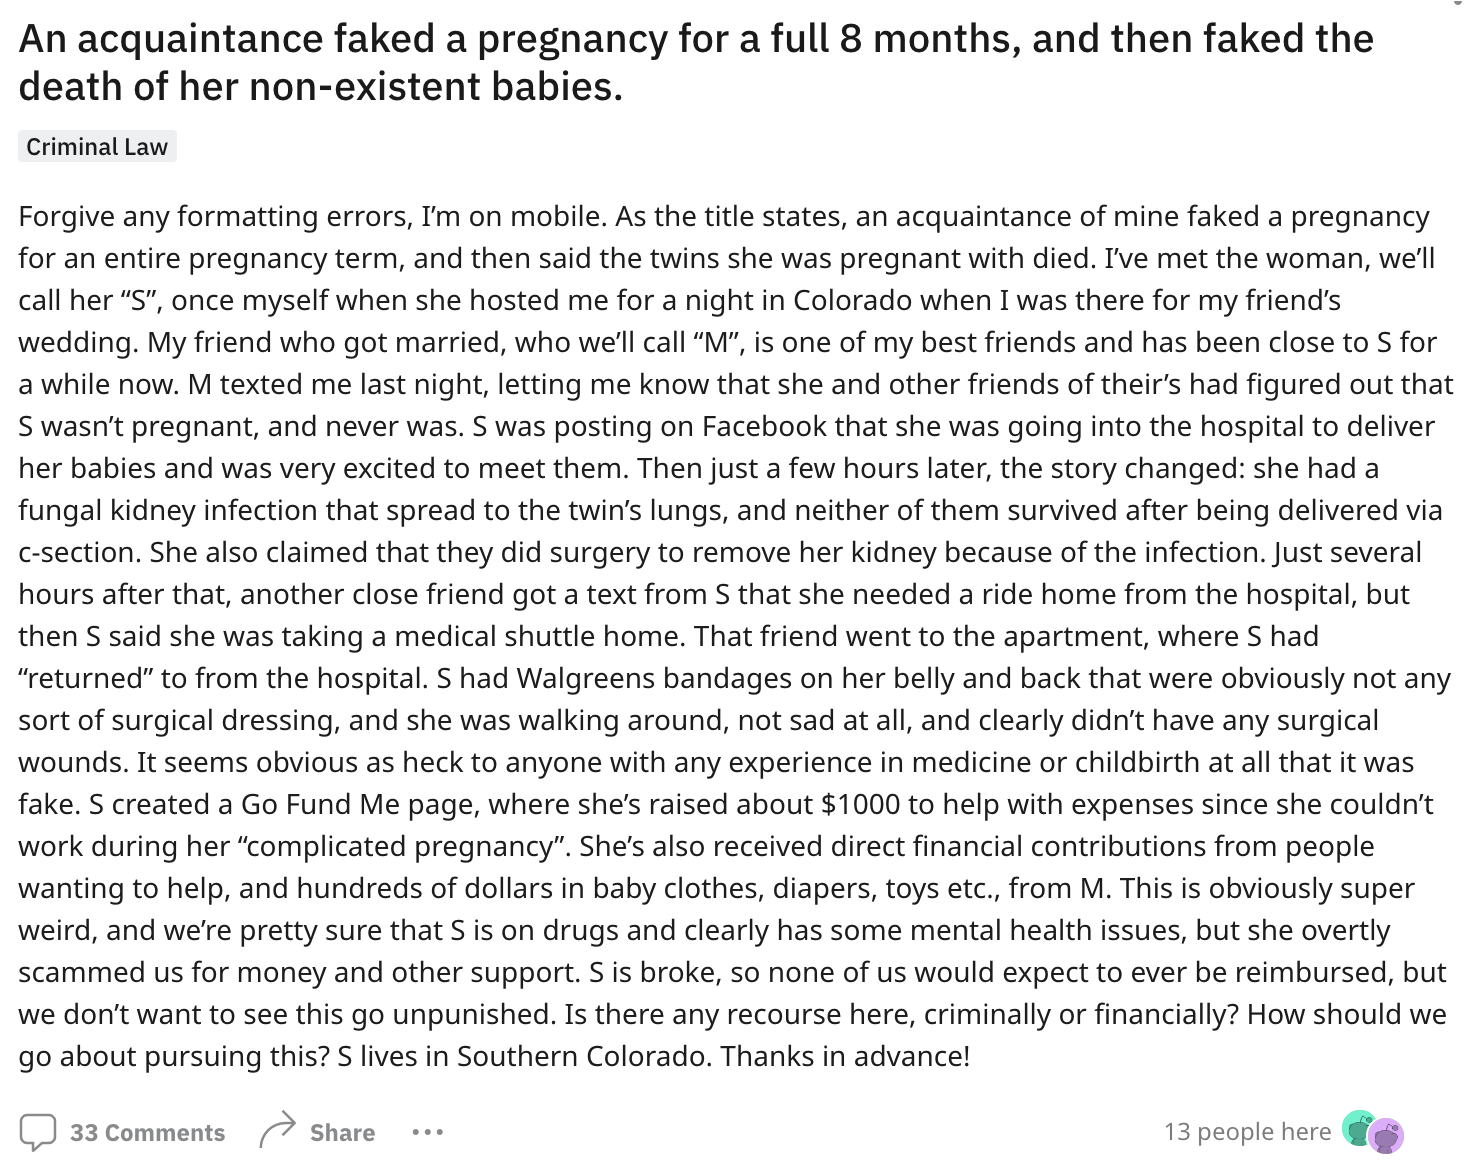 document - An acquaintance faked a pregnancy for a full 8 months, and then faked the death of her nonexistent babies. Criminal Law Forgive any formatting errors, I'm on mobile. As the title states, an acquaintance of mine faked a pregnancy for an entire p